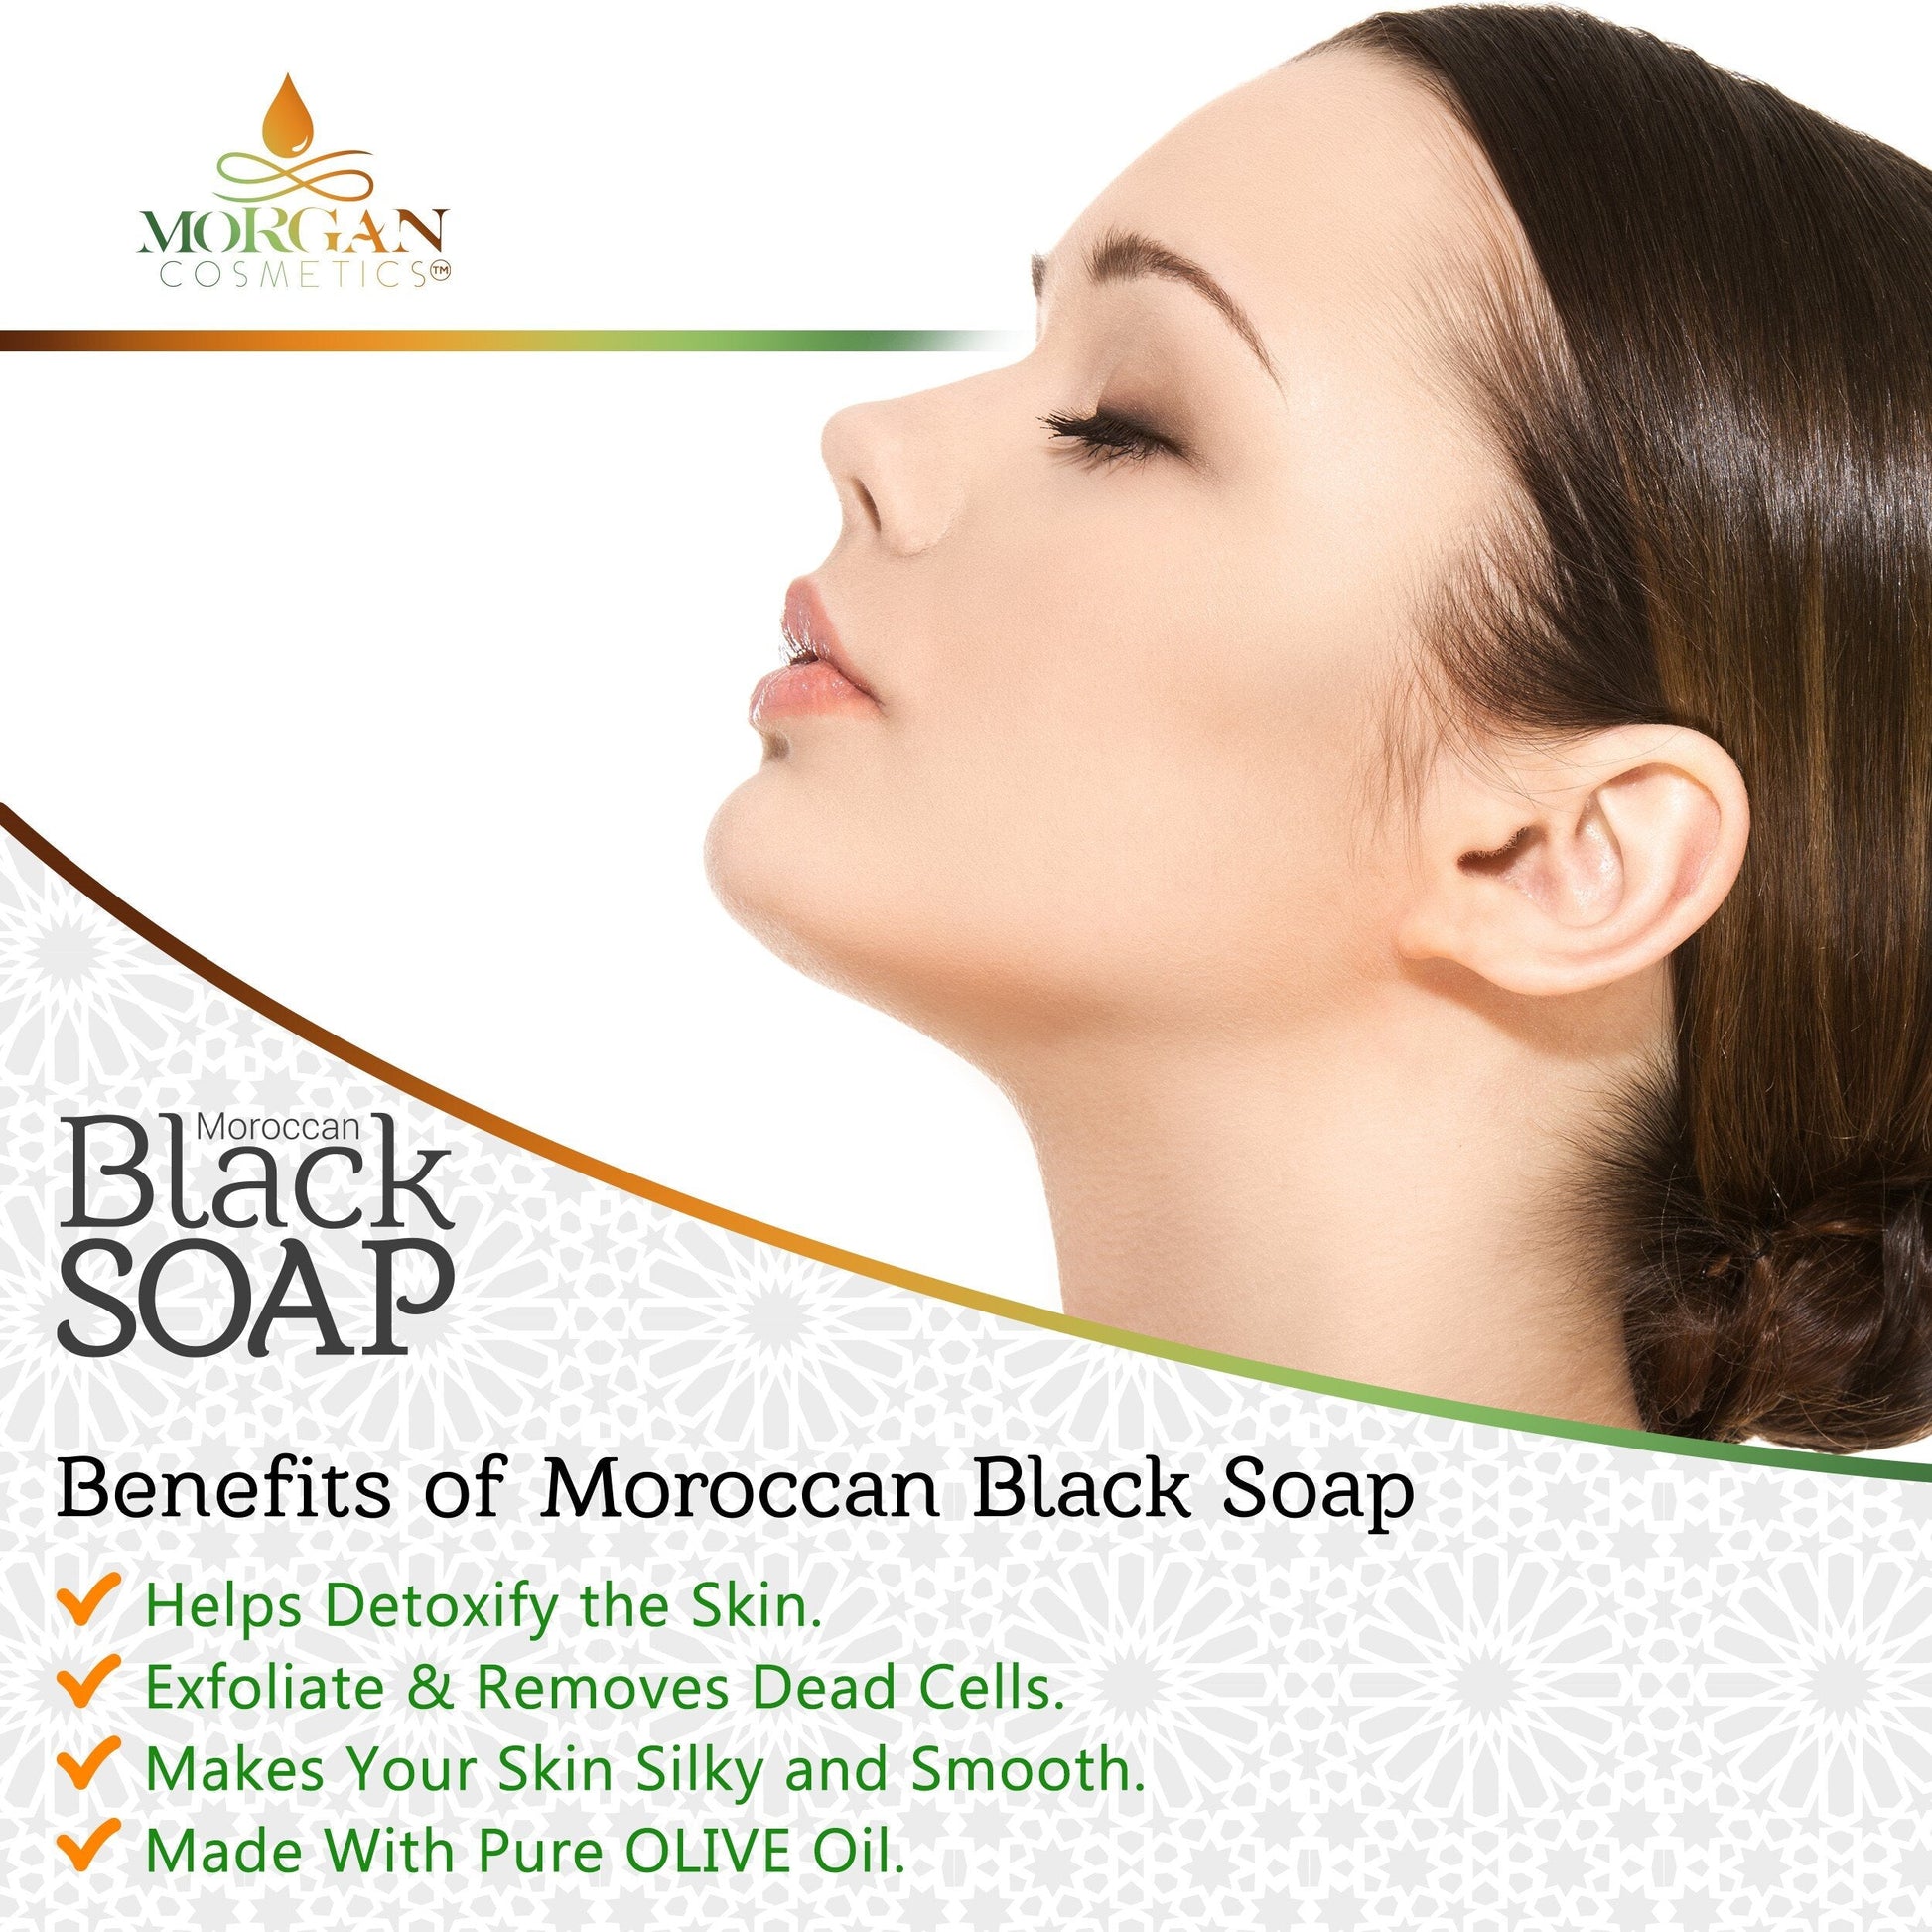 MOROCCAN BLACK SOAP WITH ROSE 8 OZ freeshipping - morgancosmeticsofficial